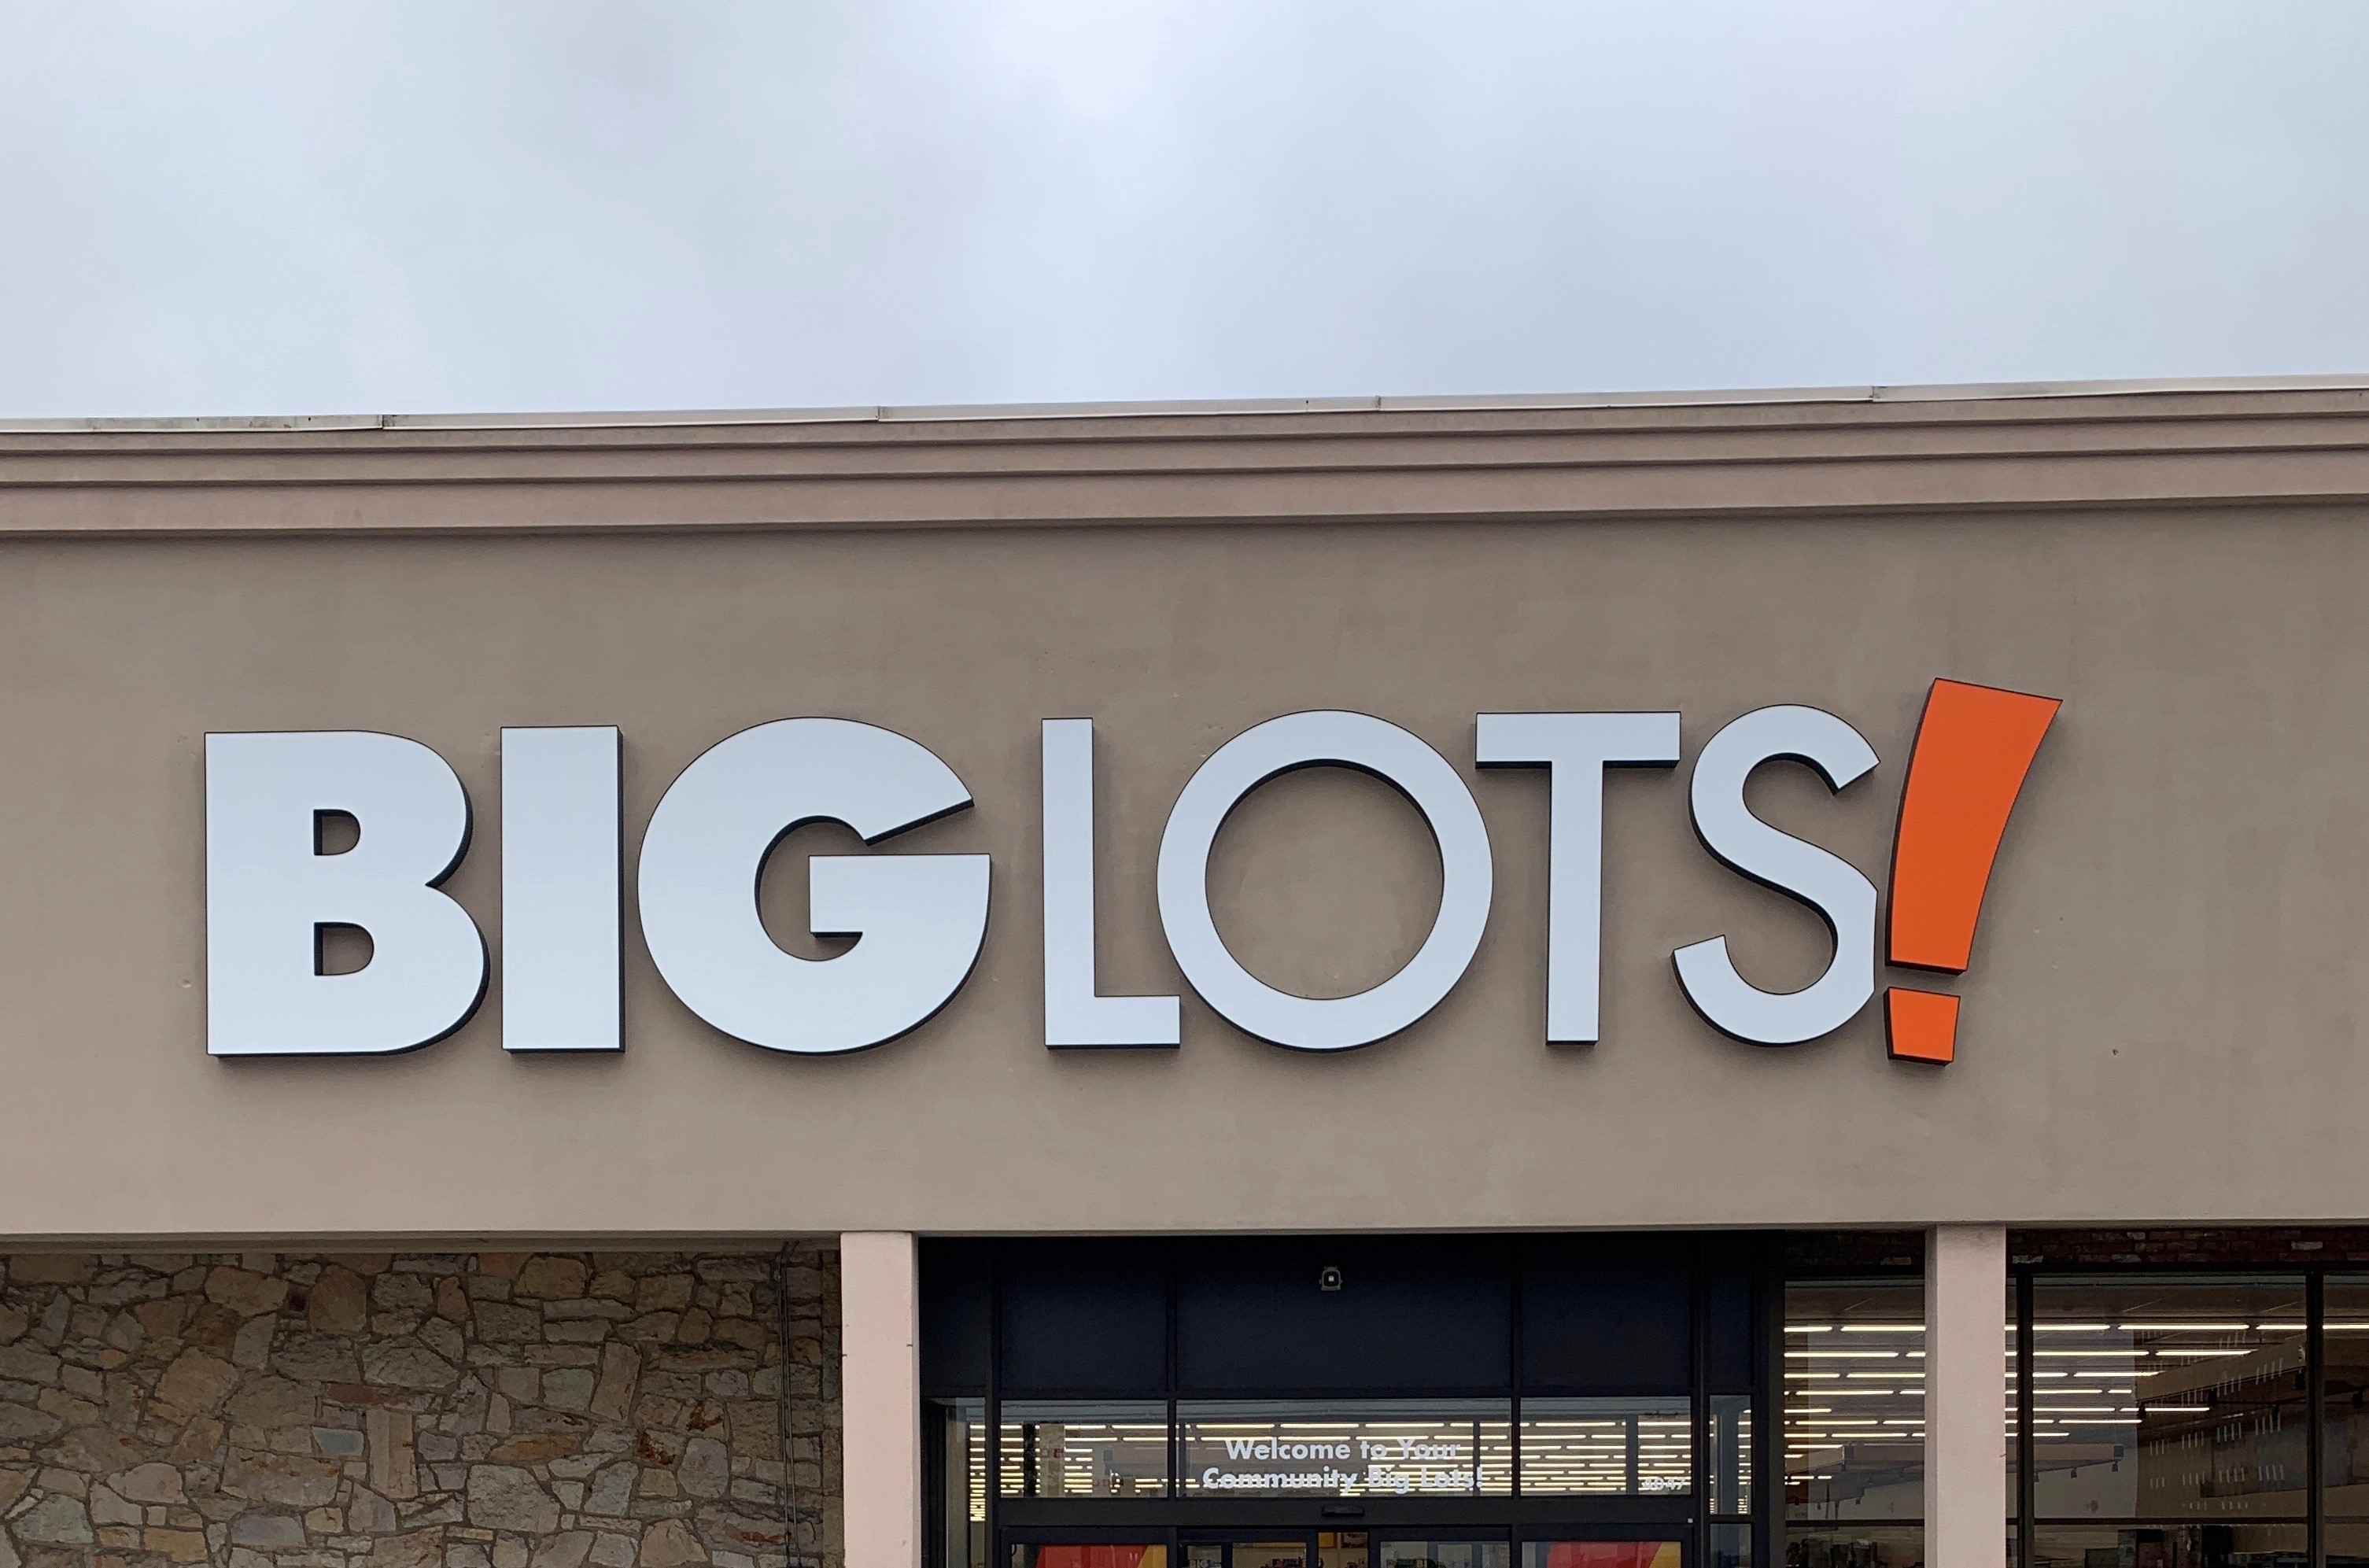 Visit The Big Lots In Monroeville Pa Located On 4047 William